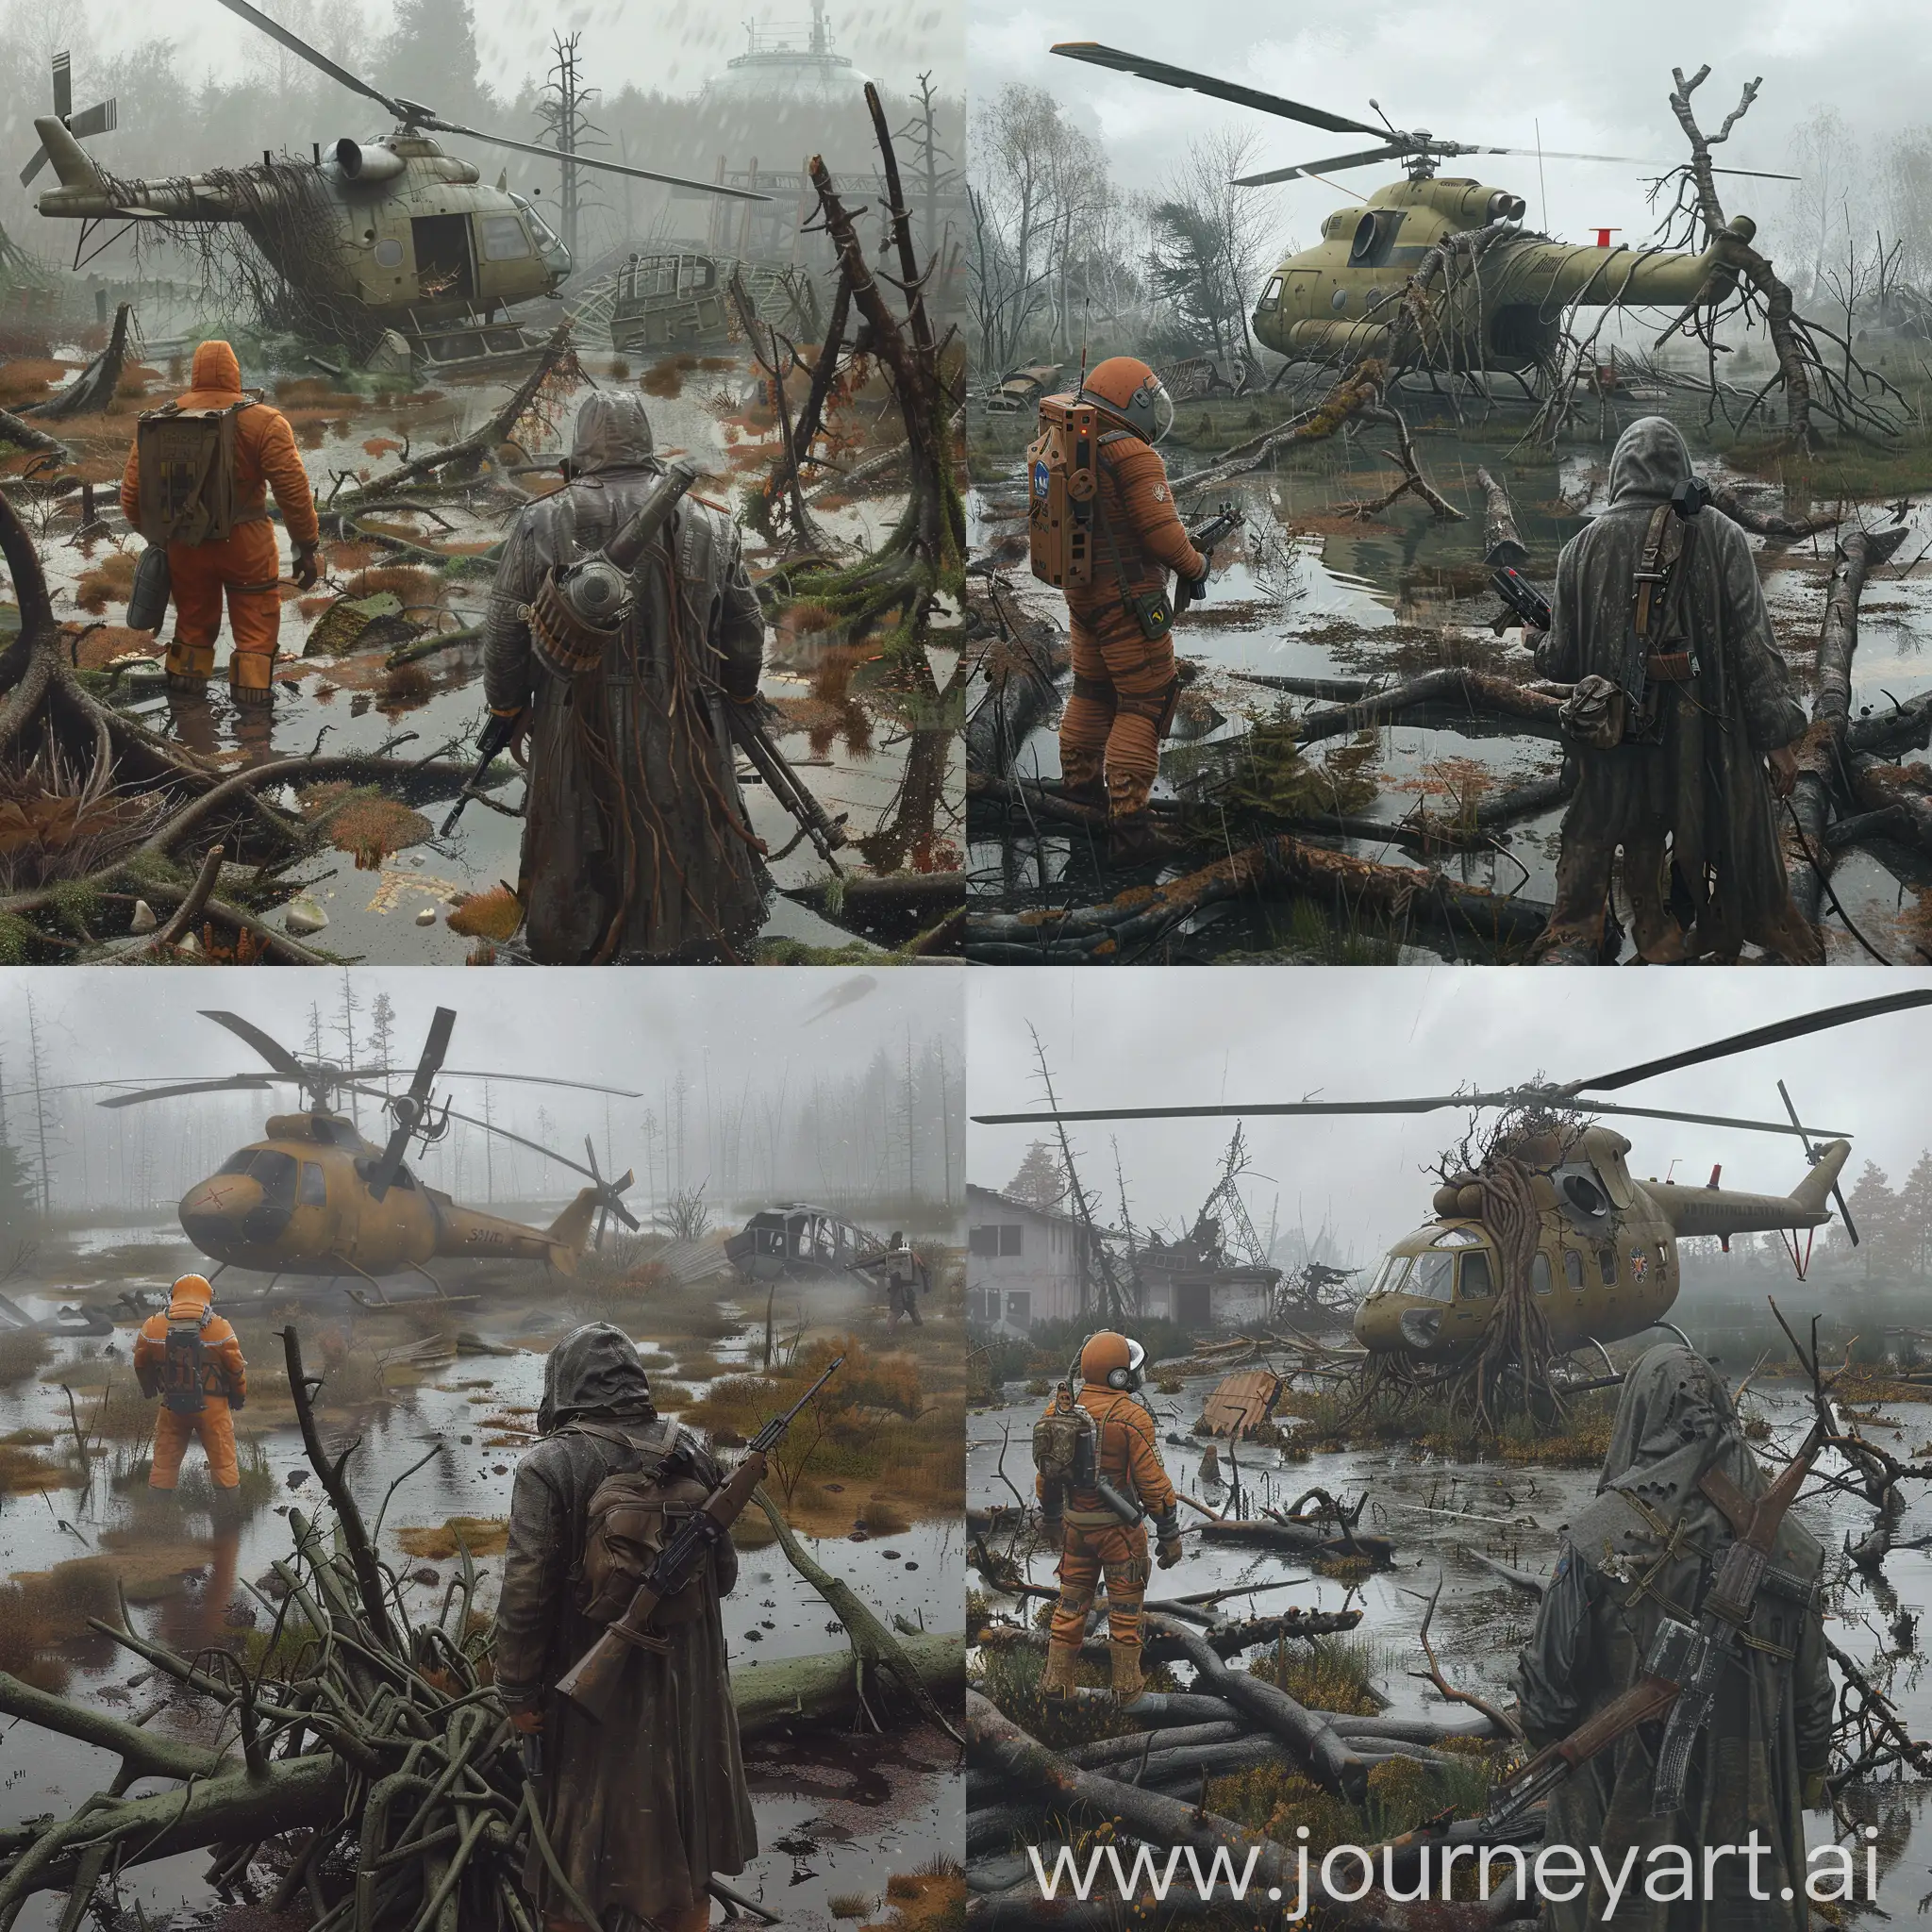 STALKER-Art-Abandoned-Chernobyl-Swamp-Encounter-with-Soviet-Space-Suit-and-Sniper